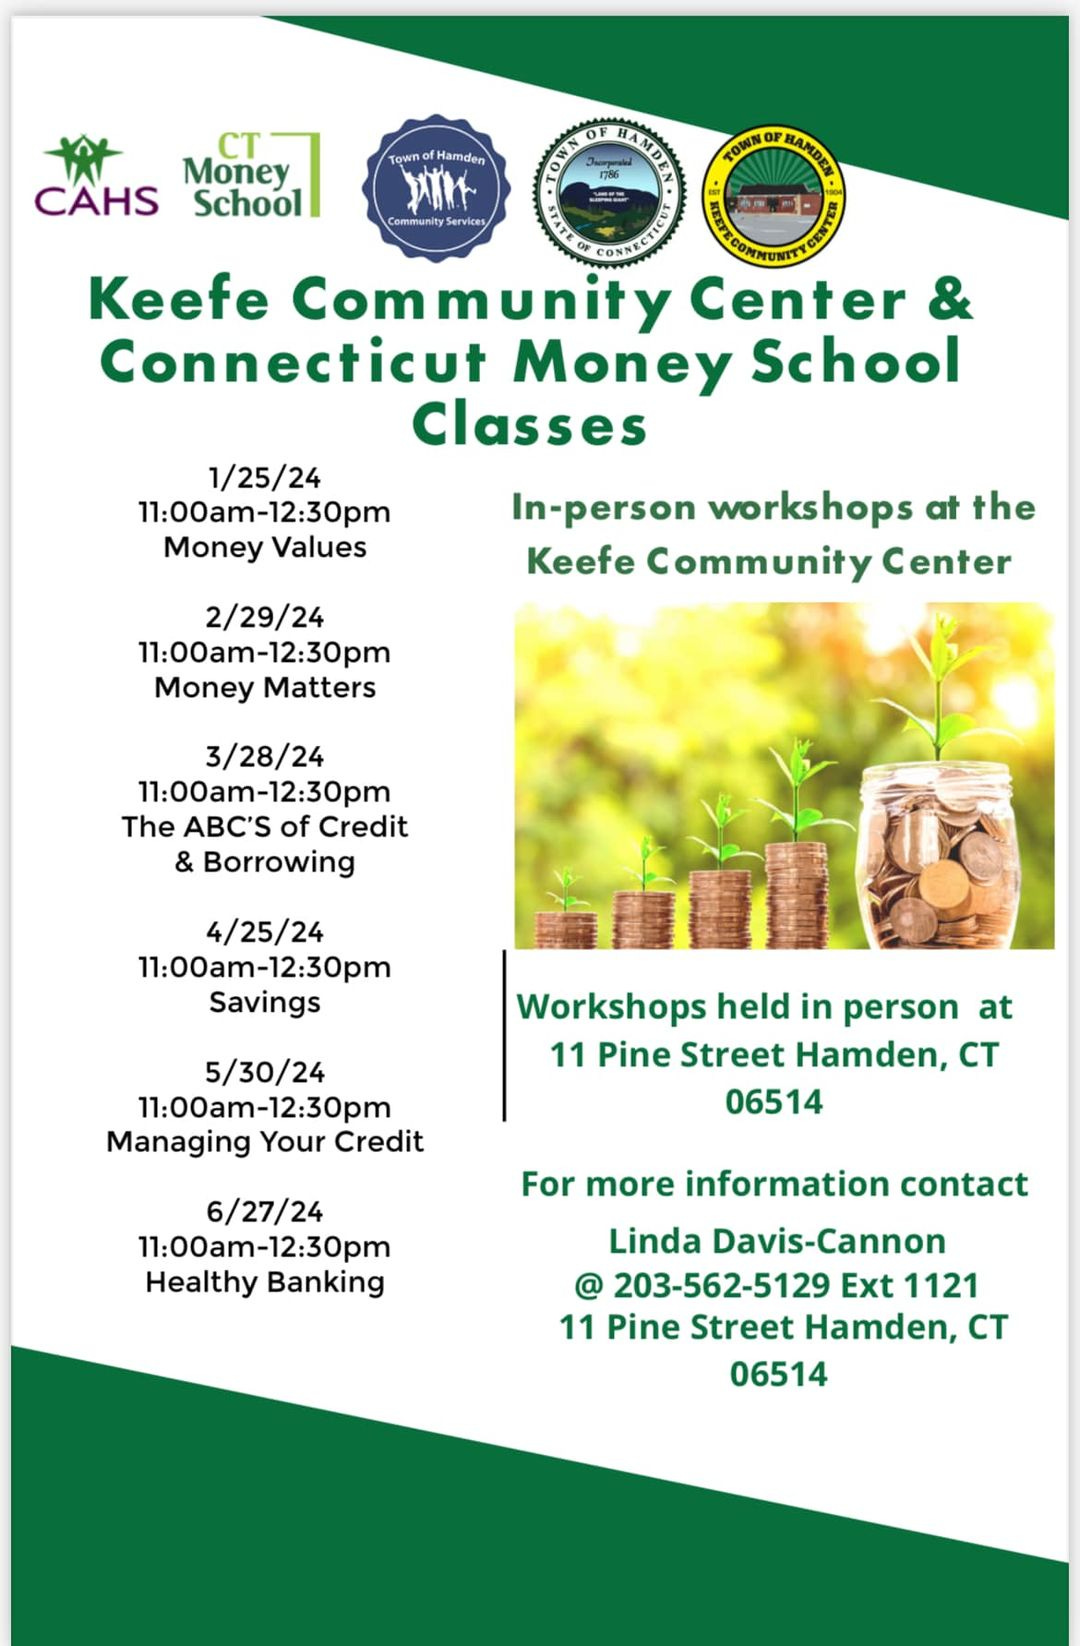 May be an image of text that says 'Money CAHS School እሉ Keefe Community Center Connecticut Money School Classes 1/25/24 11:00am-12:30pm Money Values In-person workshops at the Keefe Community Center 2/29/24 11:00am-12:30pm Money Matters 3/28/24 11:00am-12:30pm The ABC'S of Credit & Borrowing 4/25/24 11:00am-12:30pm Savings 5/30/24 11:00am-12:30pm Managing Your Credit Workshops held in person at 11 Pine Street Hamden, CT 06514 6/27/24 11:00am-12:30pm 11:00am-1 Healthy Banking For more information contact Linda Davis-Cannon @ 203-562-5129 Ext 1121 11 Pine Street Hamden, CT 06514'